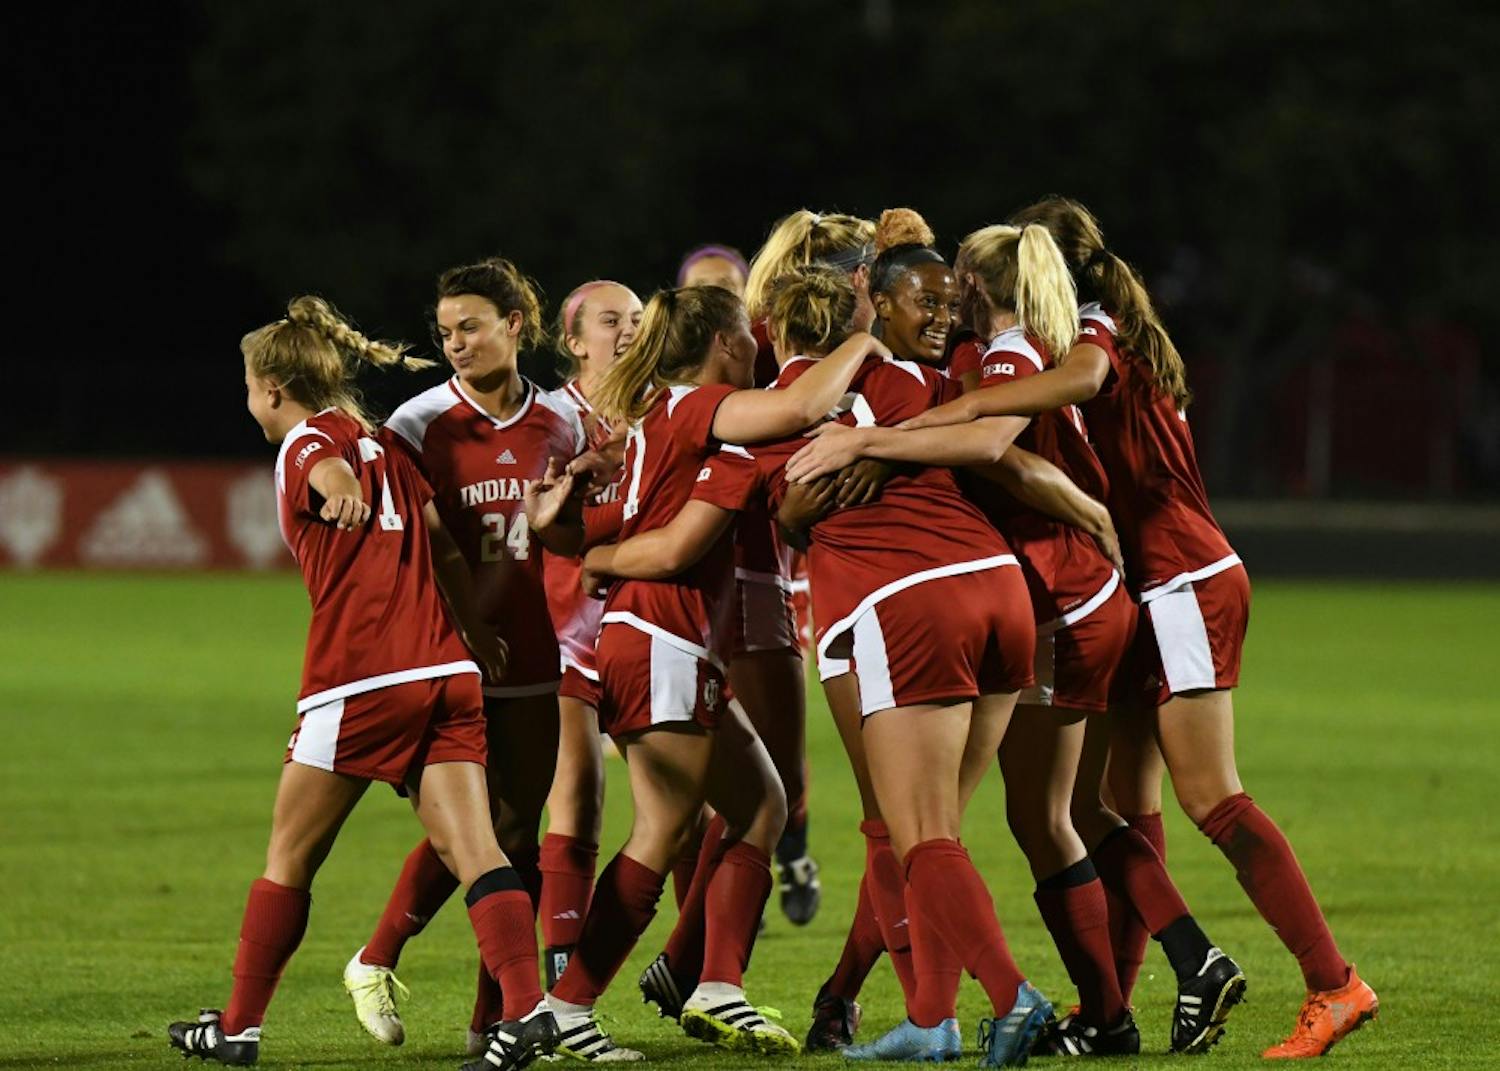 IU celebrates after junior forward Maya Piper scores her seventh goal of the season against Iowa on Oct. 12 at Bill Armstrong Stadium. Former IU women's soccer associate head coach Sergio Gonzalez left the program Tuesday to become an associate head coach with the Ohio State men's soccer team.